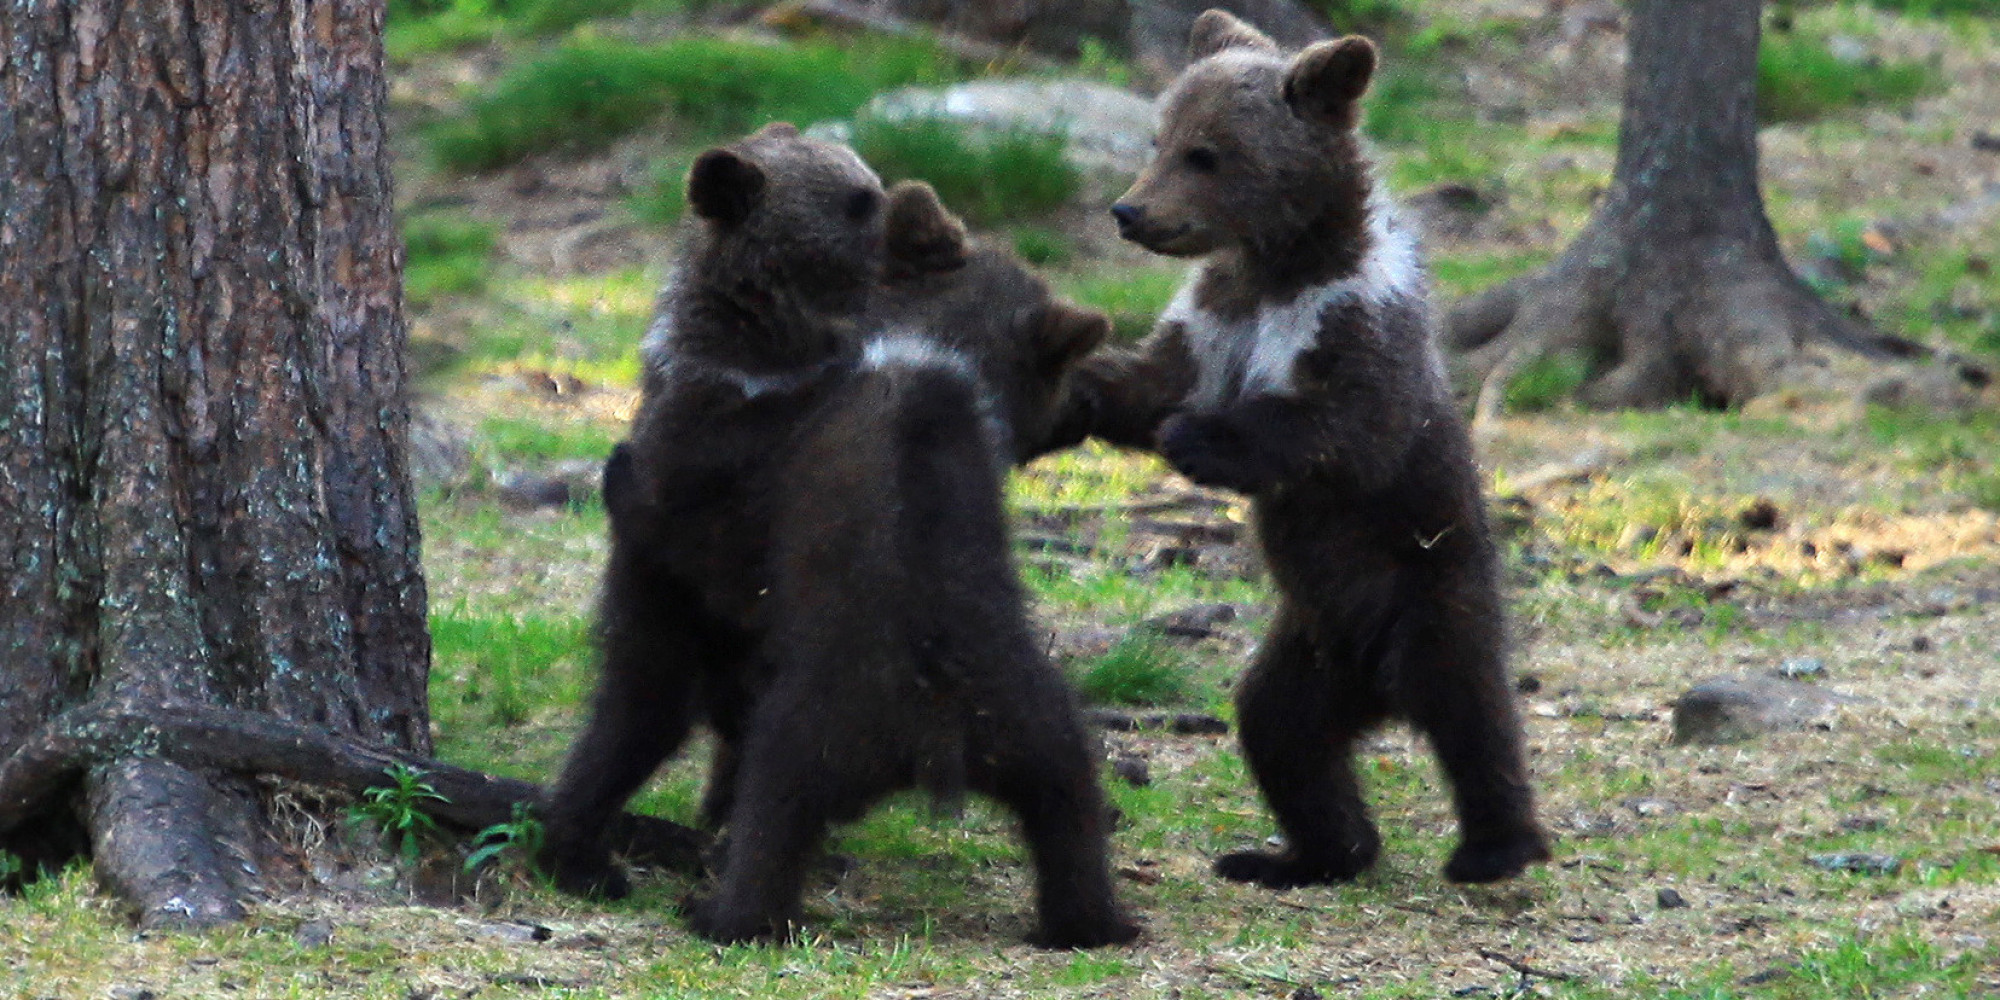 Bear Cubs Play #39 Ring Around The Rosie #39 And We All Fall Down From